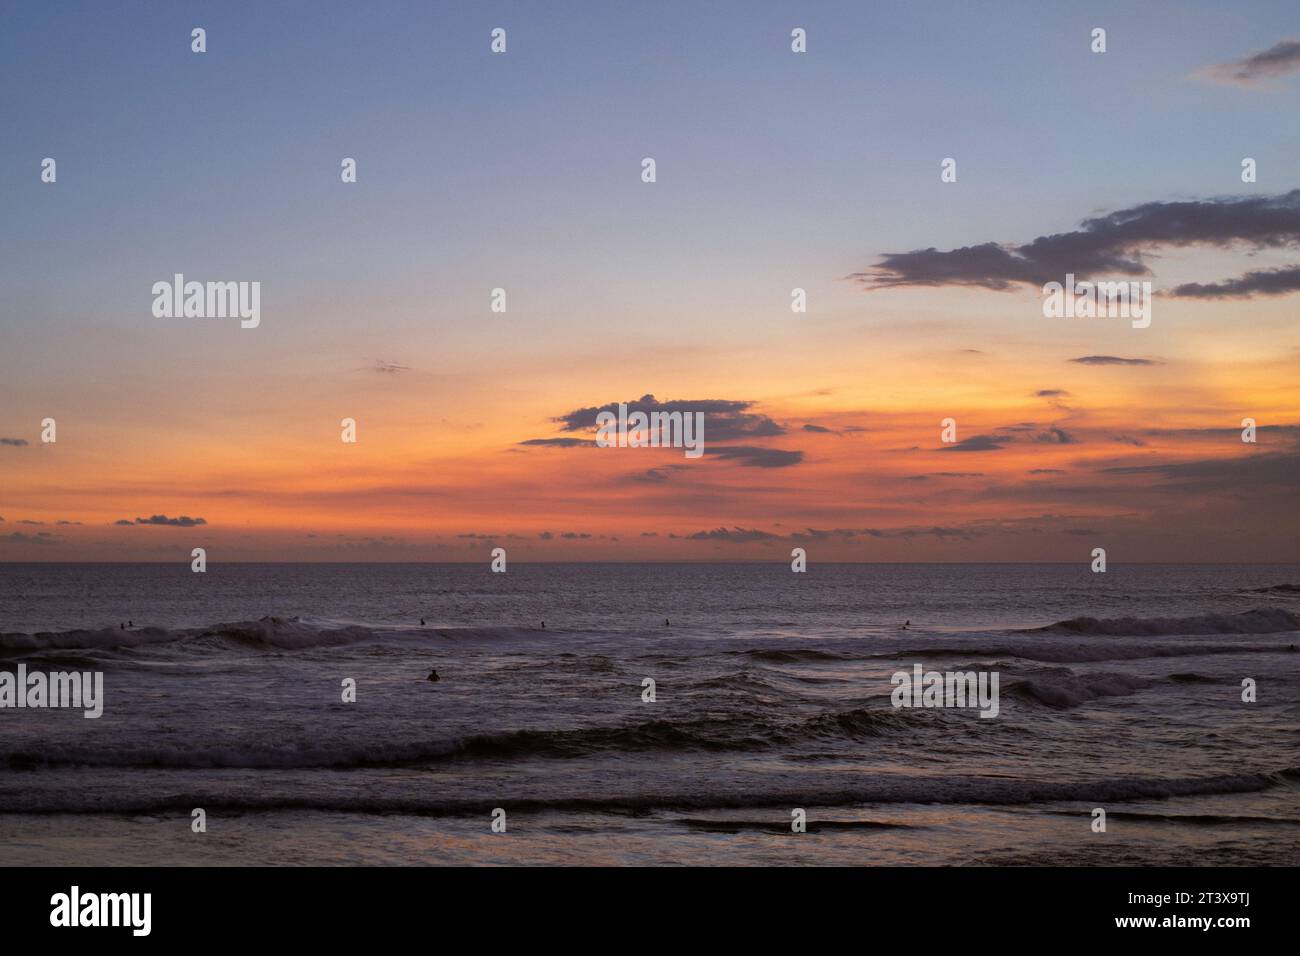 Surfers catching waves at sunset, Bali, Indonesia. Stock Photo